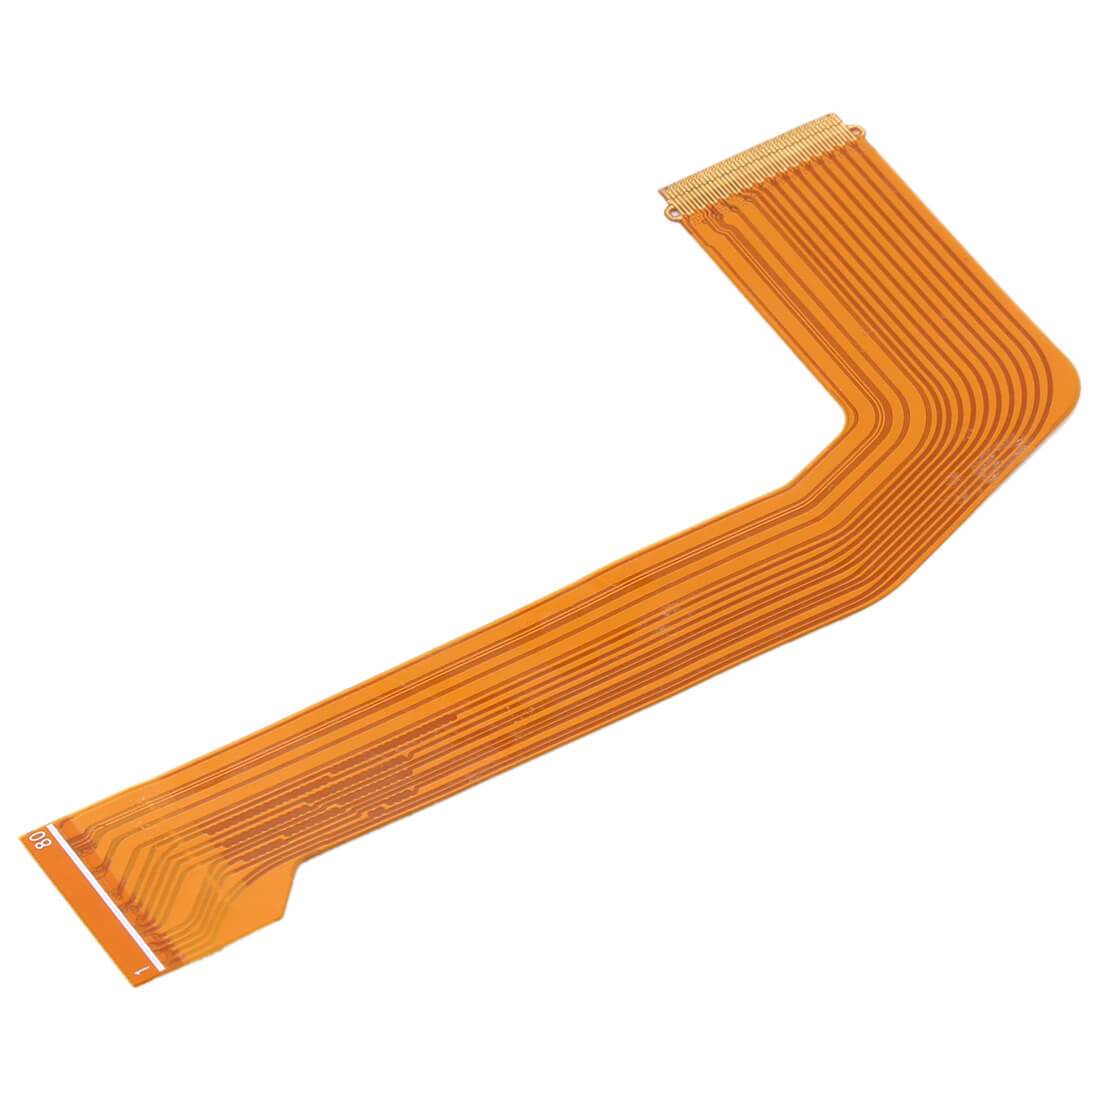 Main LCD Internal Flex Cable For Samsung Galaxy Tab S3 9.7 Replacement Connection